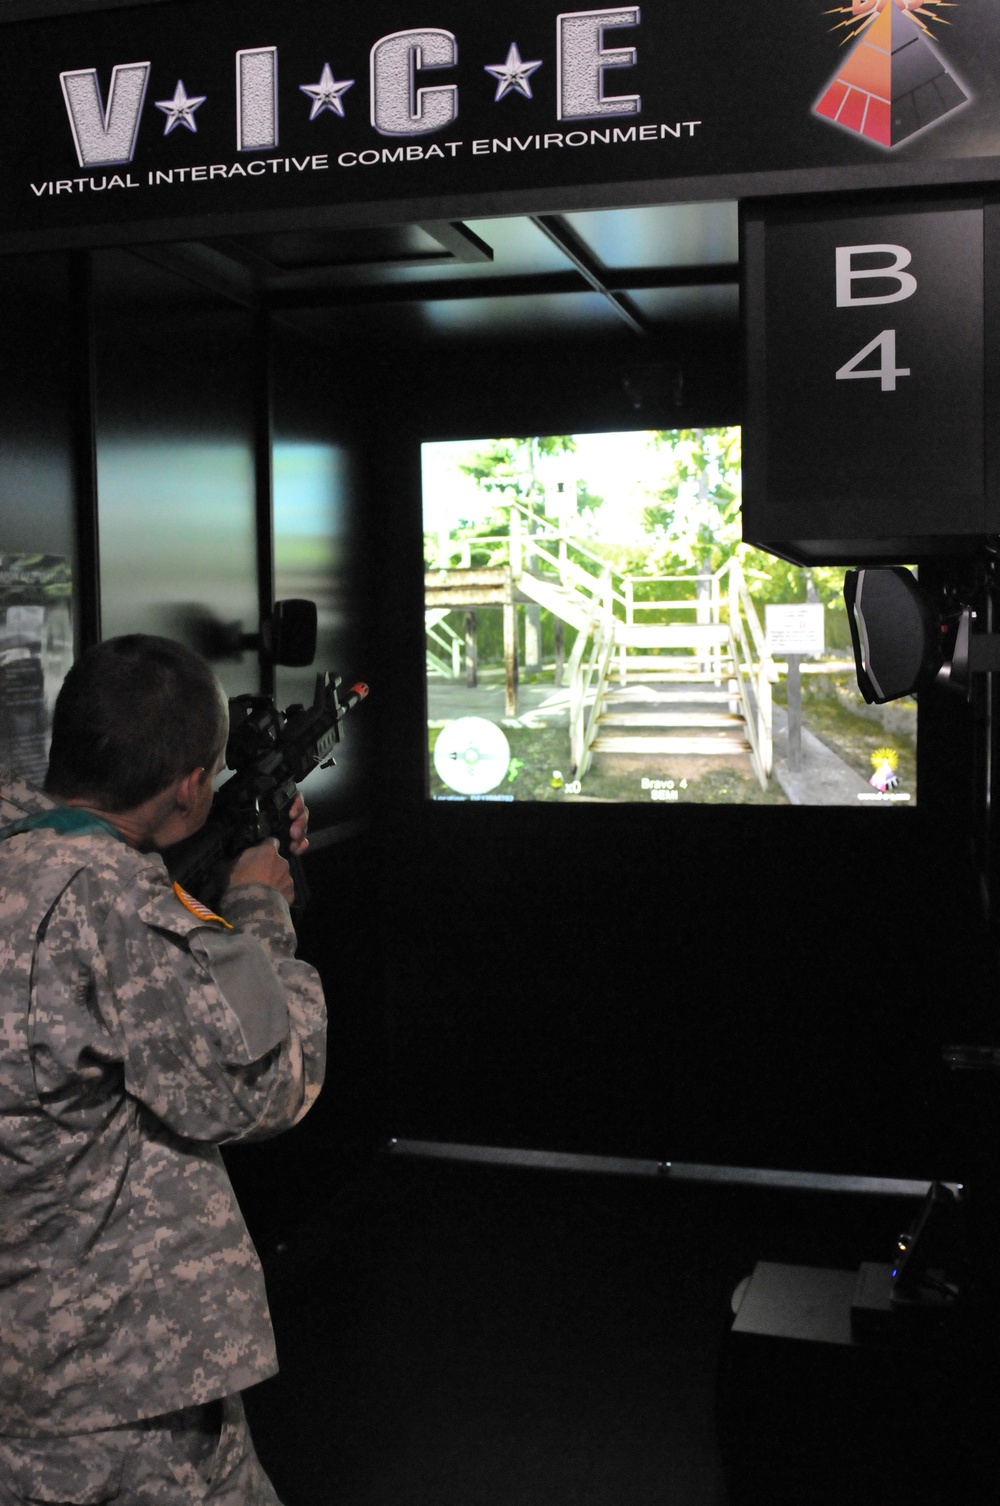 OSW soldier using Virtual Interactive Combat Environment